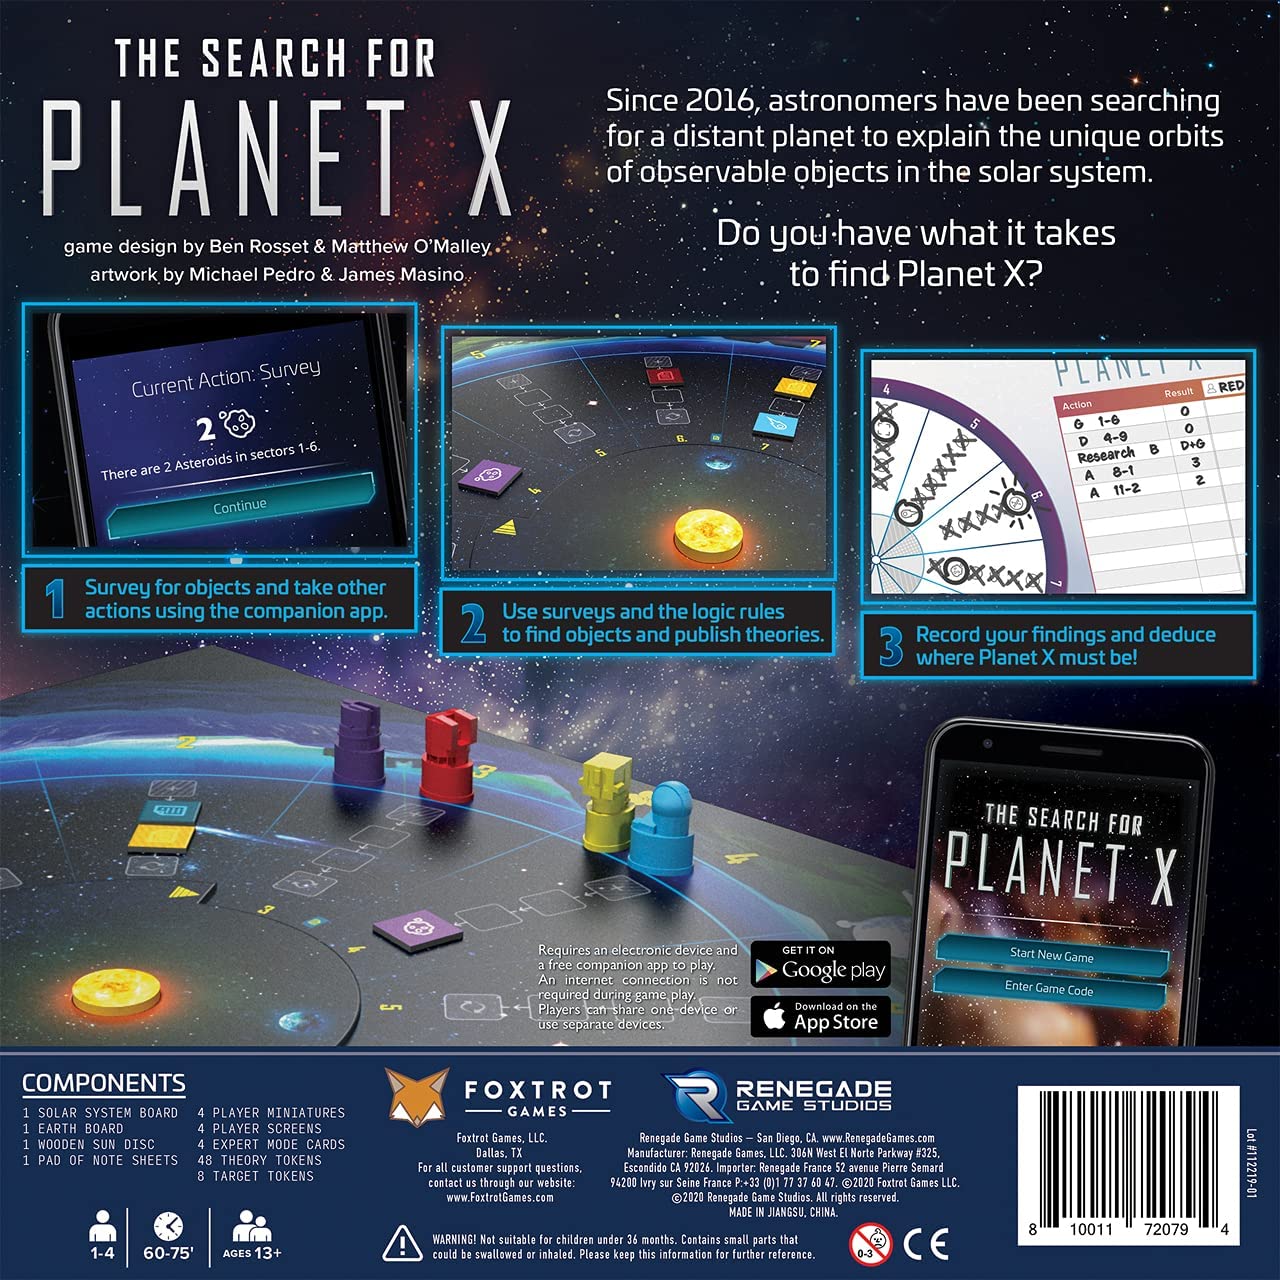 Find out about The Search for Planet X